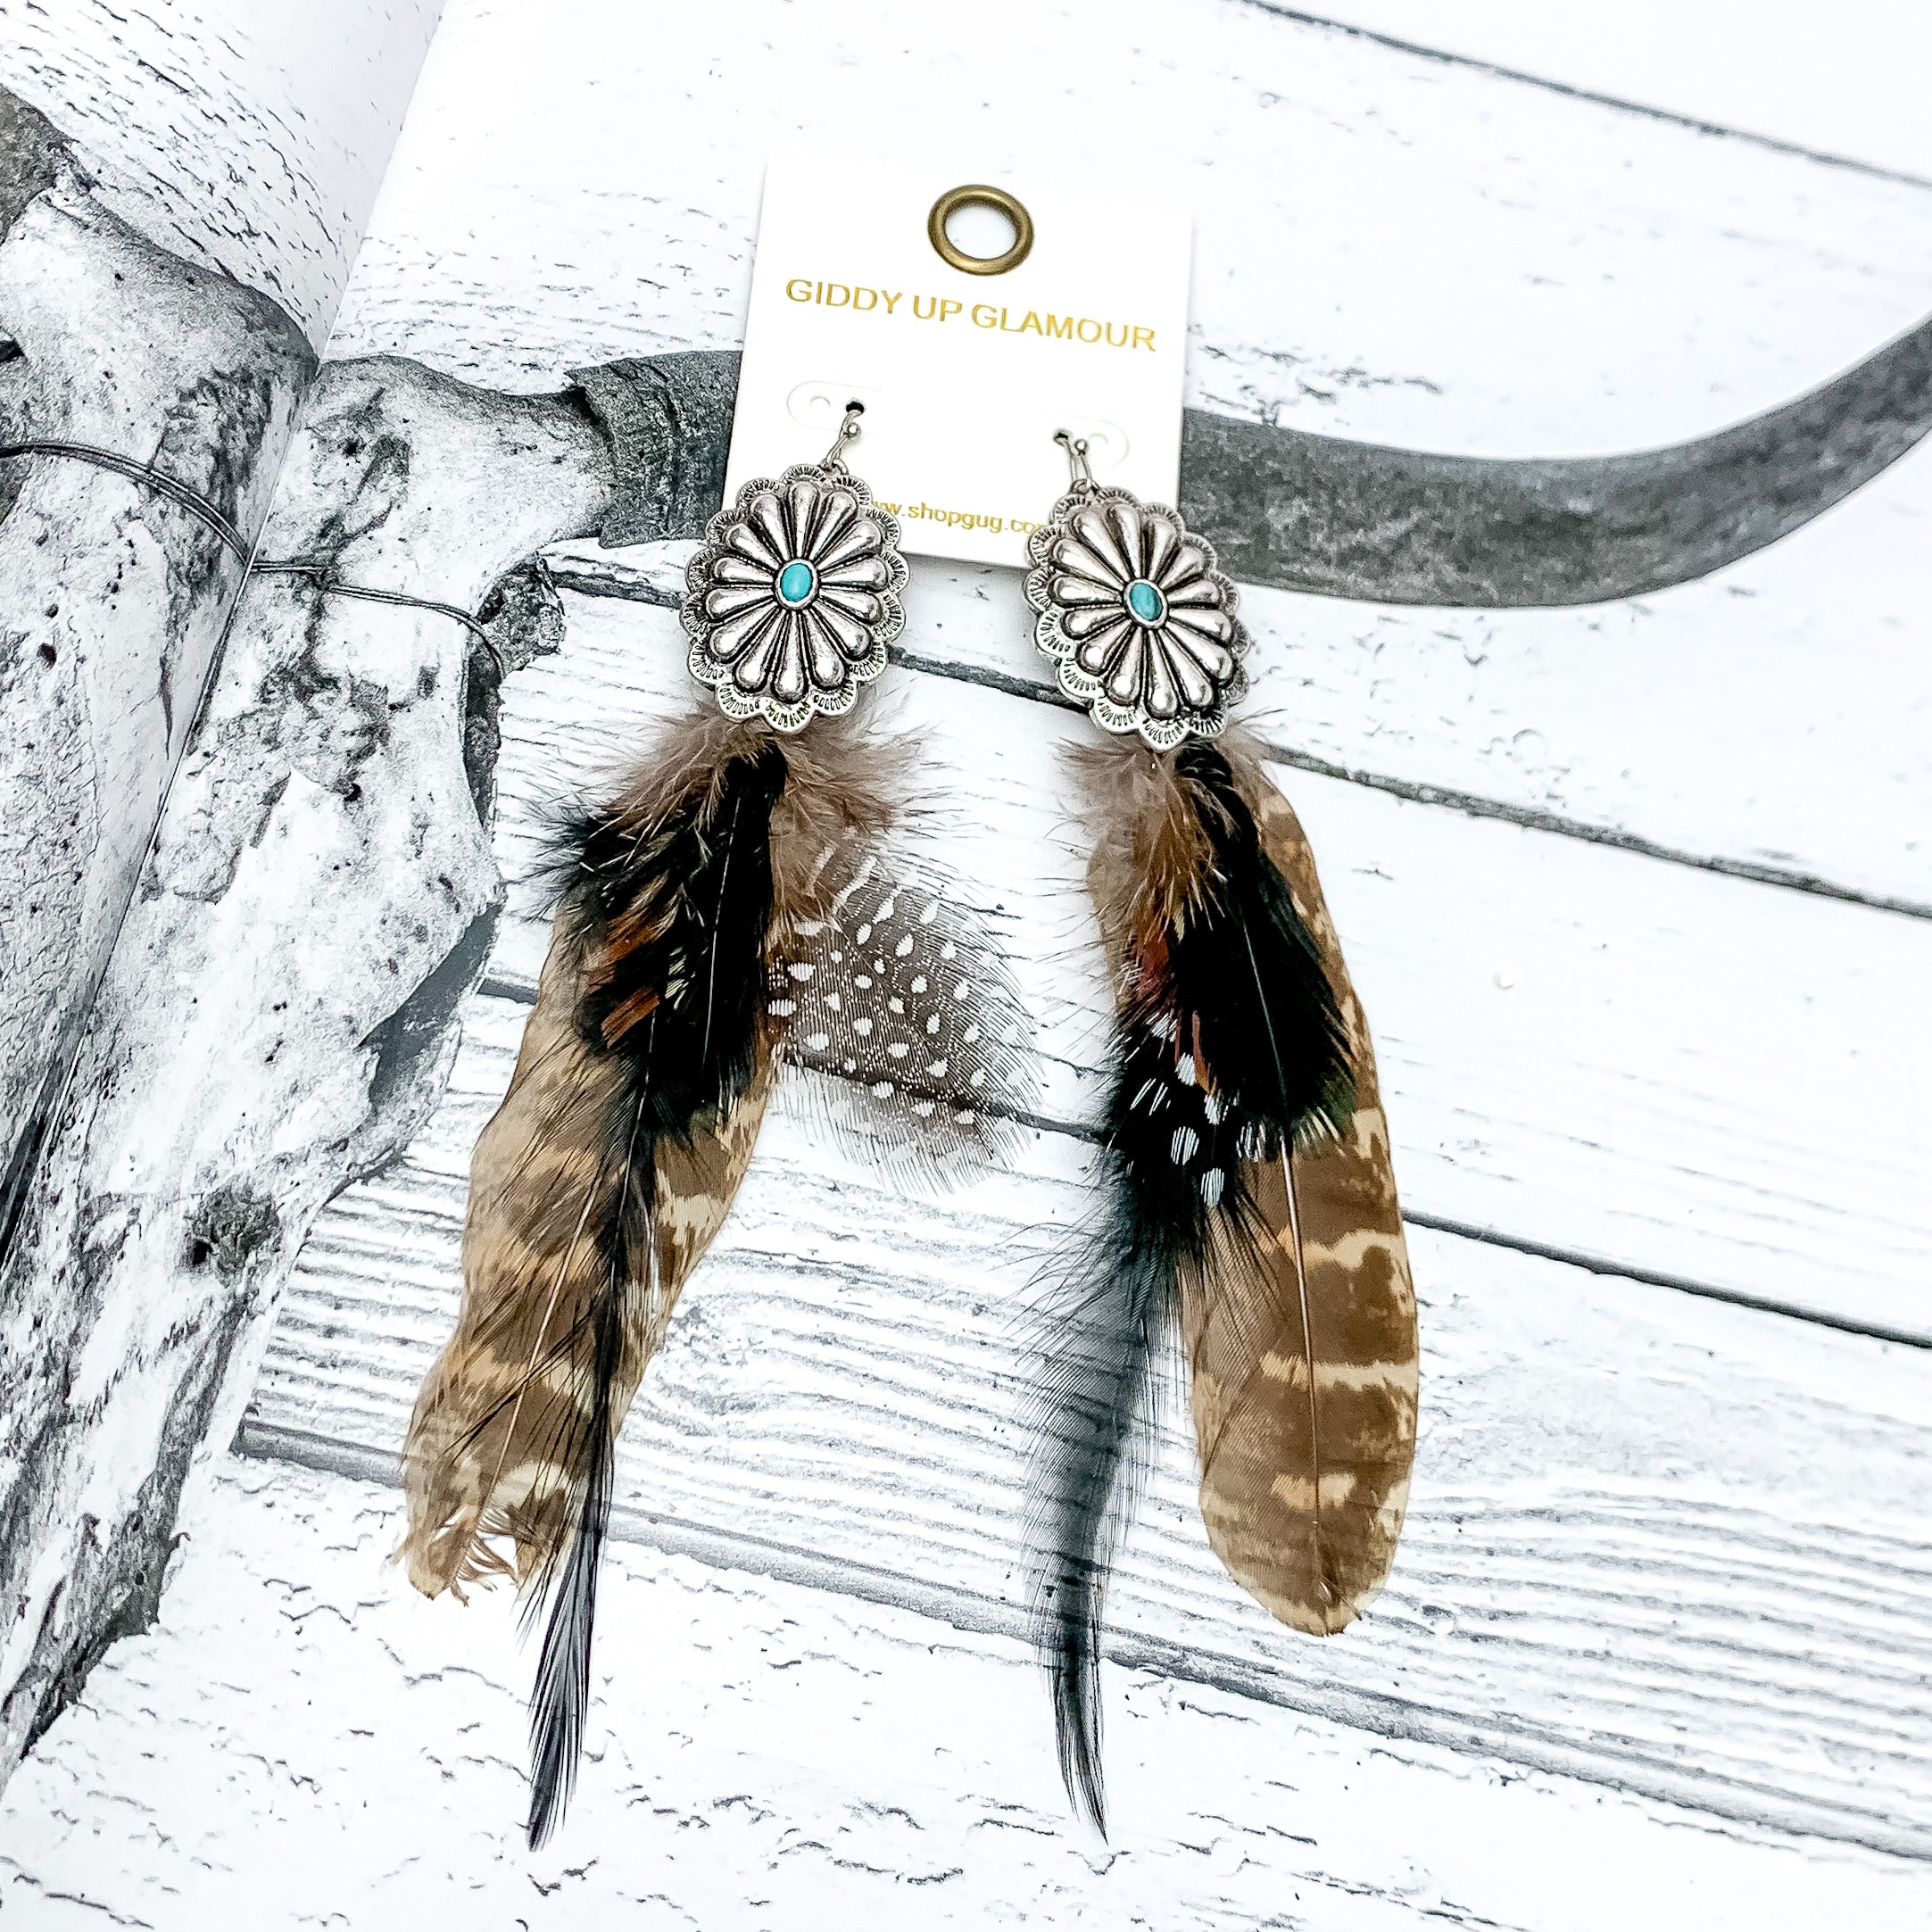 Desert Doll Silver Tone Feather Earrings in Black. Pictured on an open book with a western picture.